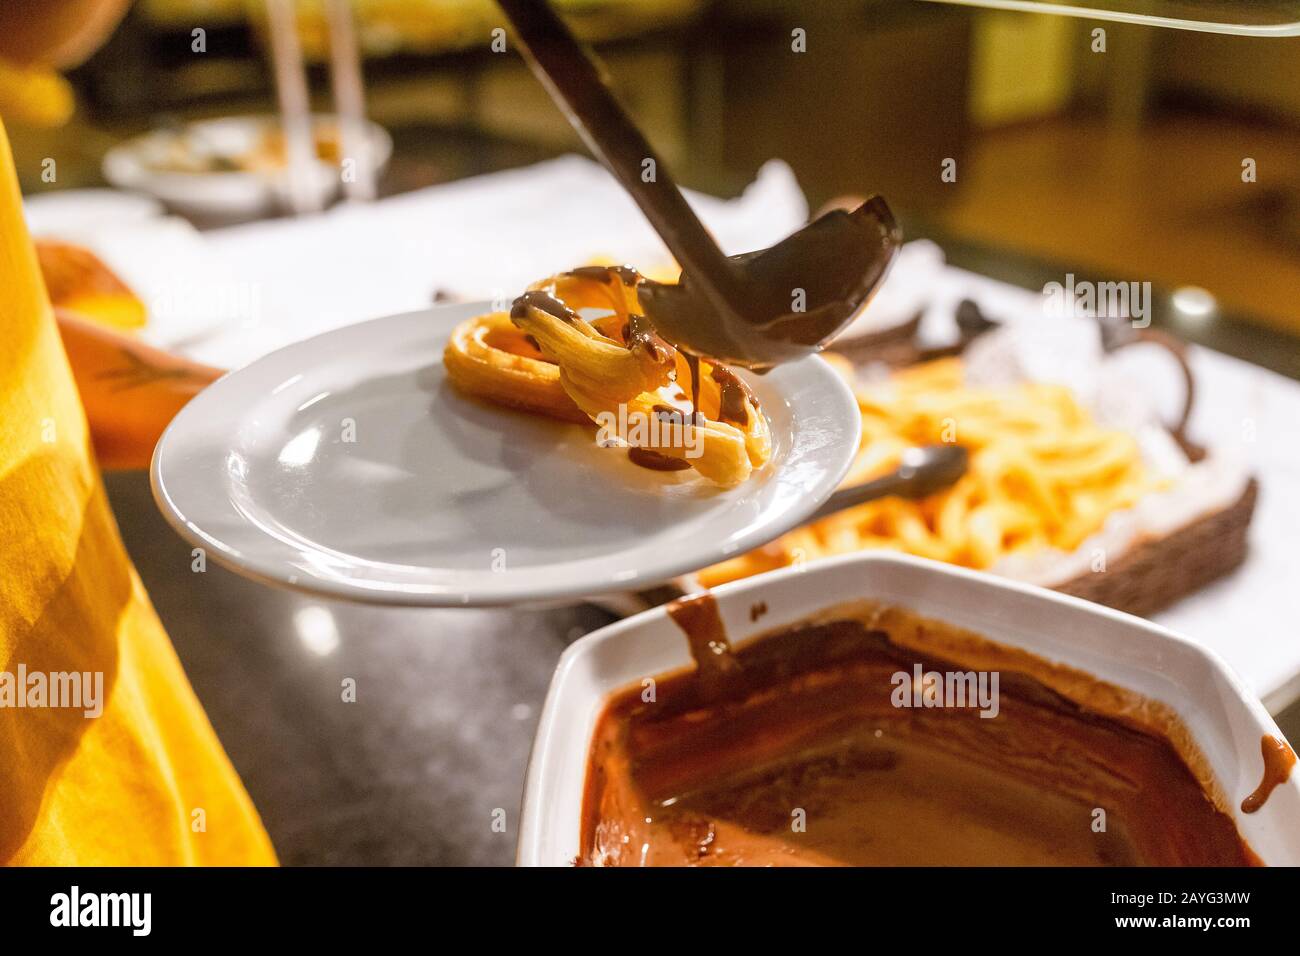 Churros with sugar and chocolate, famous spanish dessert Stock Photo